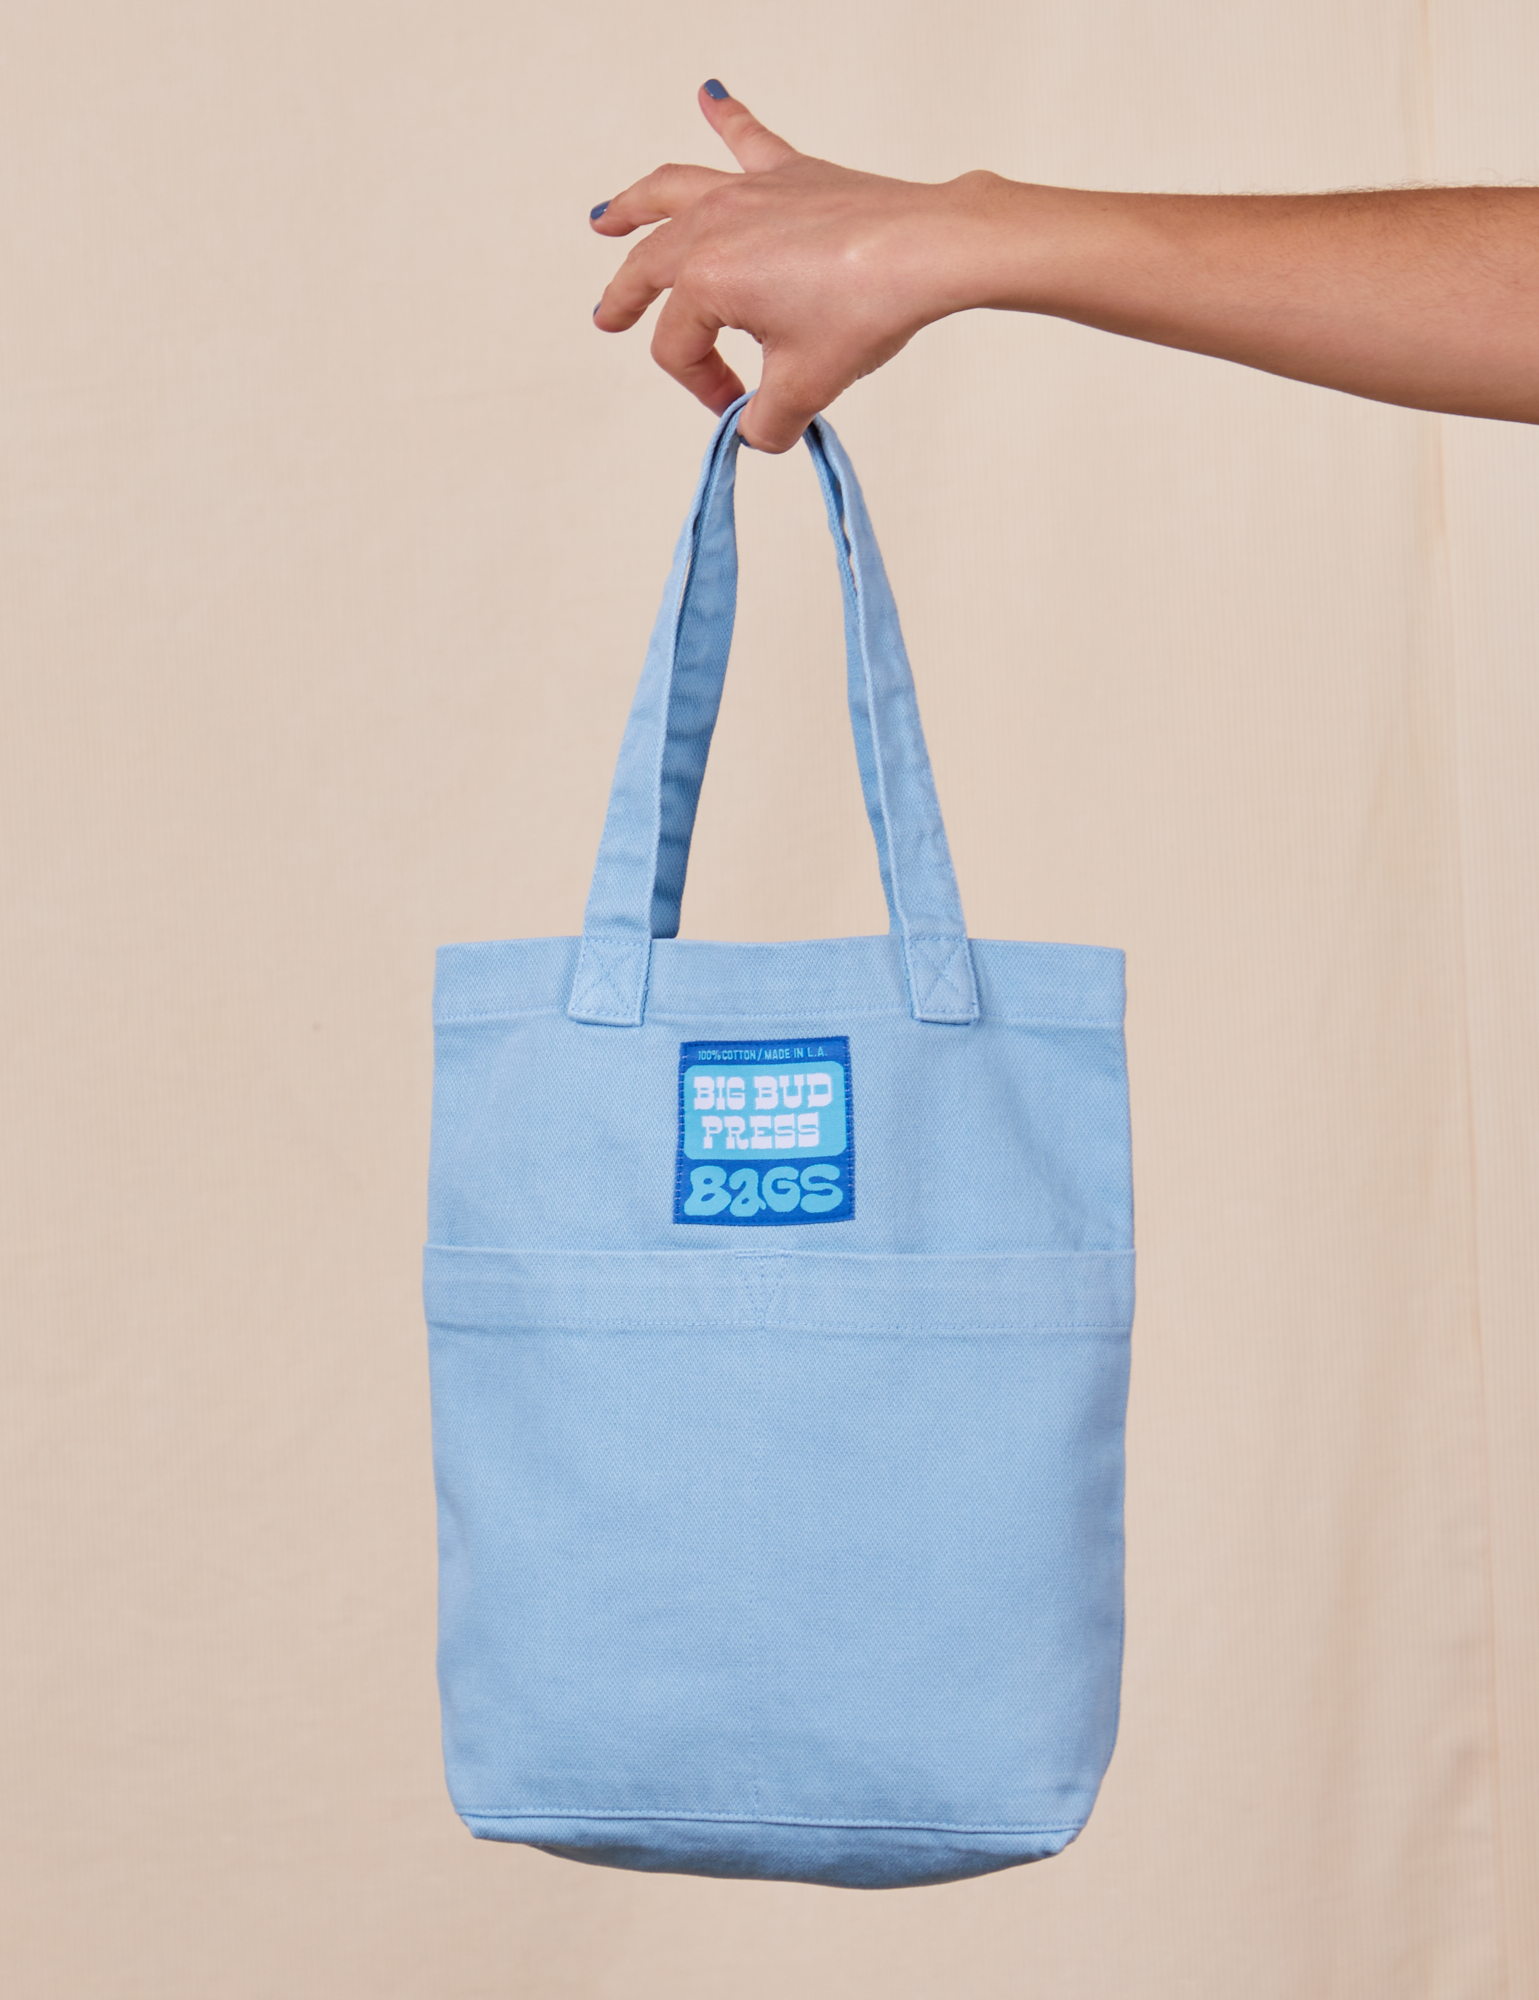 Mini Tote Bags in Baby Blue